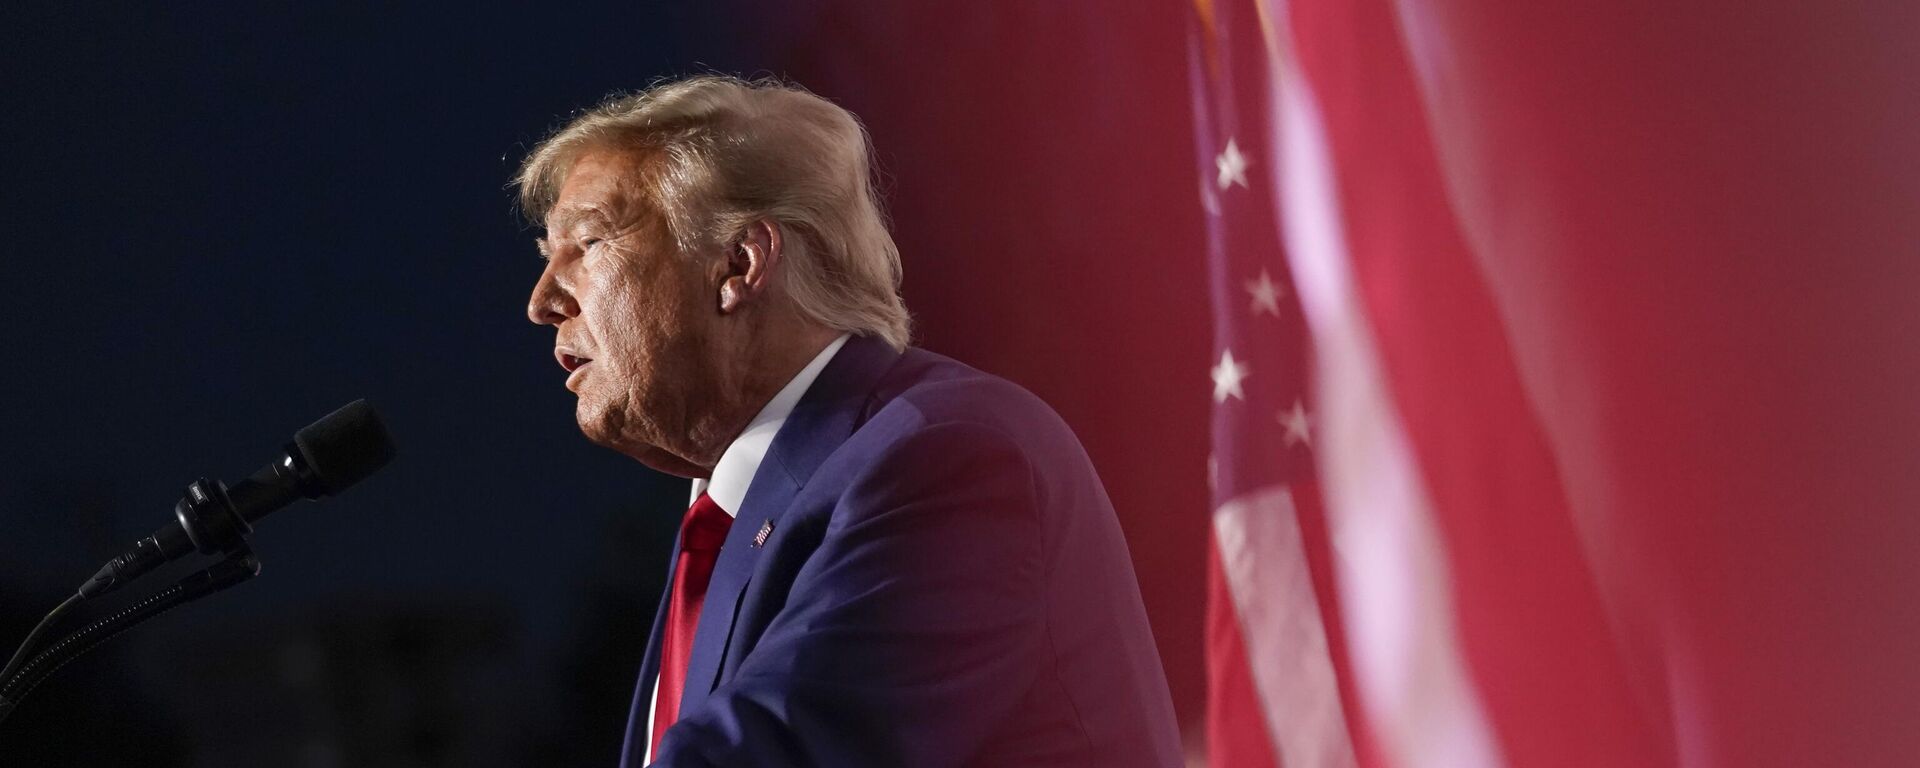 Former President Donald Trump speaks at Trump National Golf Club in Bedminster, N.J., Tuesday, June 13, 2023, after pleading not guilty in a Miami courtroom earlier in the day to dozens of felony counts that he hoarded classified documents and refused government demands to give them back. - Sputnik International, 1920, 01.08.2023